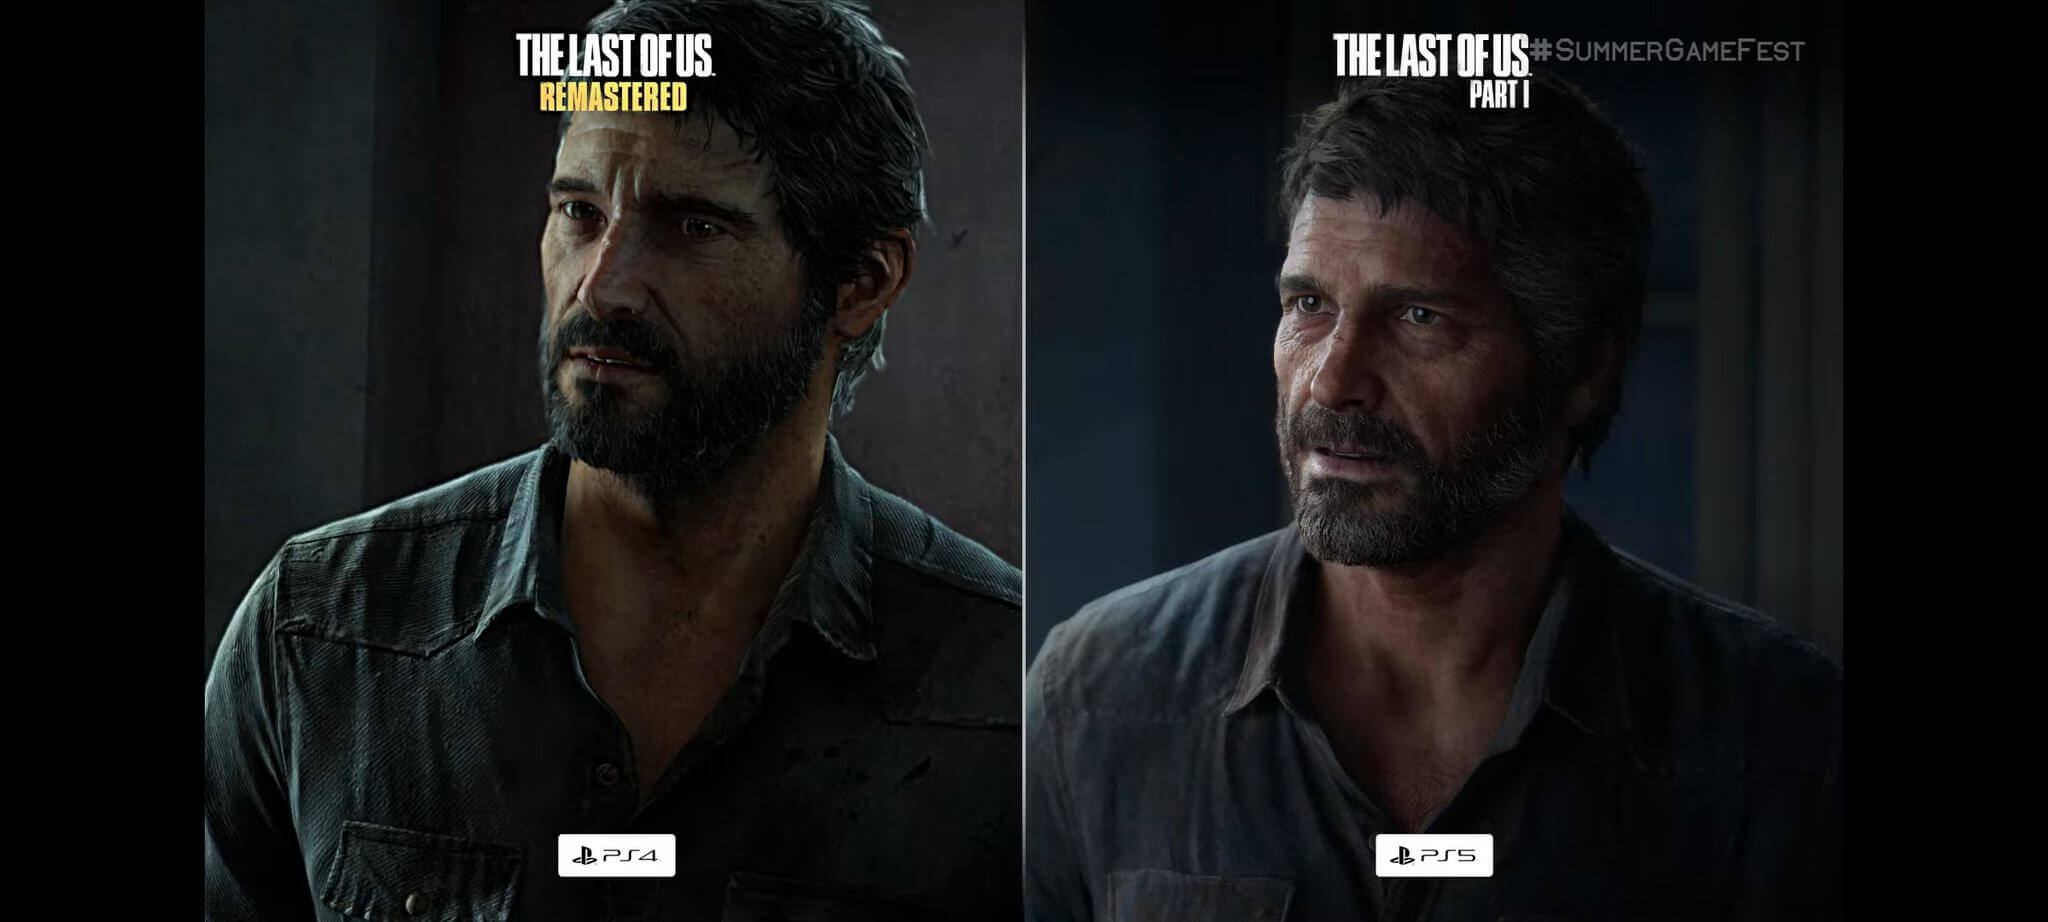 The Last of Us Remake, The Last of Us Part 1, The Last of Us, Naughty Dog, Sony, Delfos